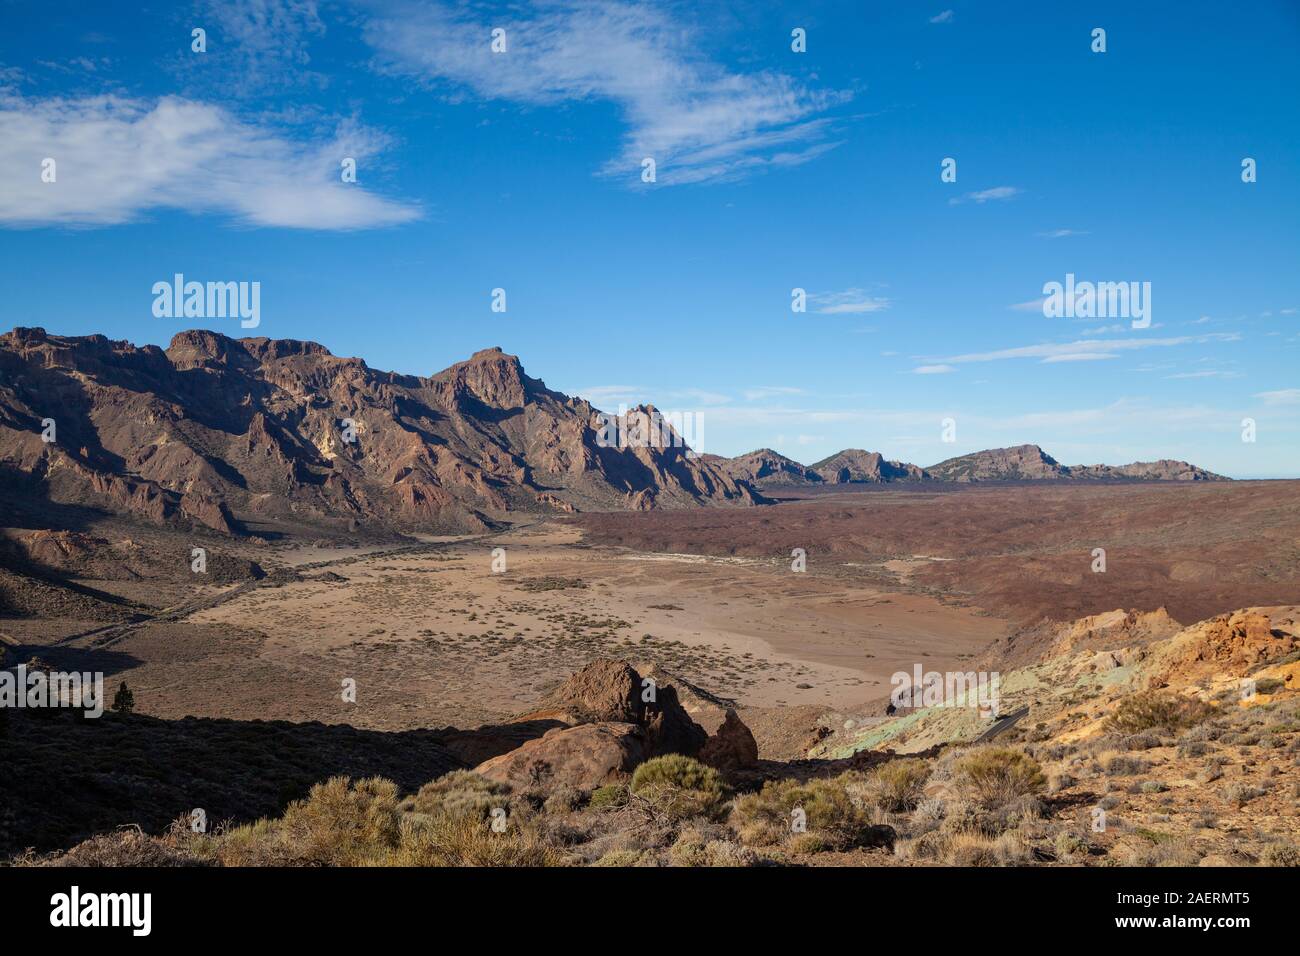 Looking West from the lower slopes of Mount Guajara, Teide National Park, Tenerife Island, Spain. Stock Photo